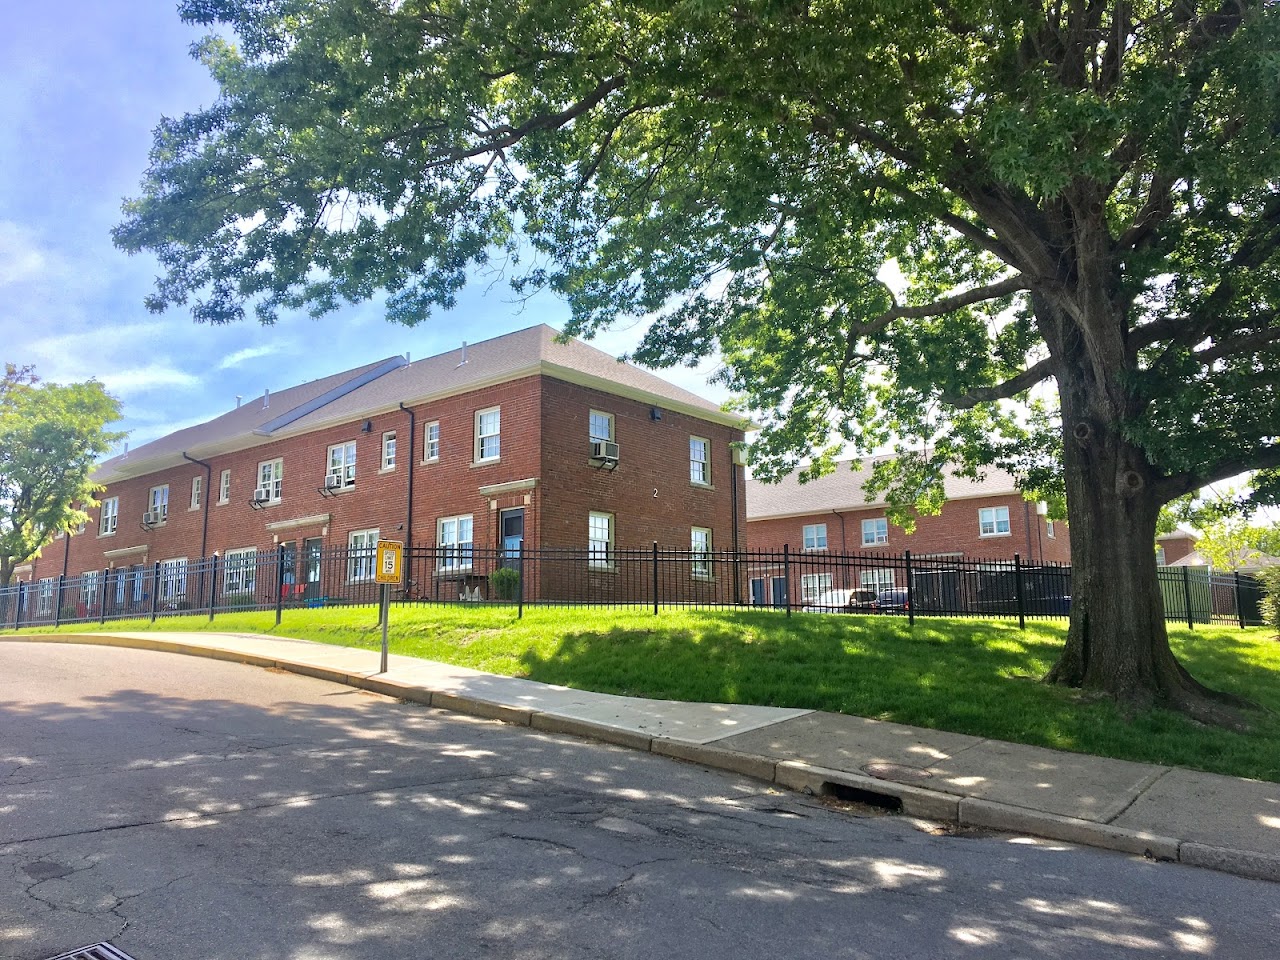 Photo of PROSPECT HEIGHTS I. Affordable housing located at 560 PROSPECT STREET PAWTUCKET, RI 02860